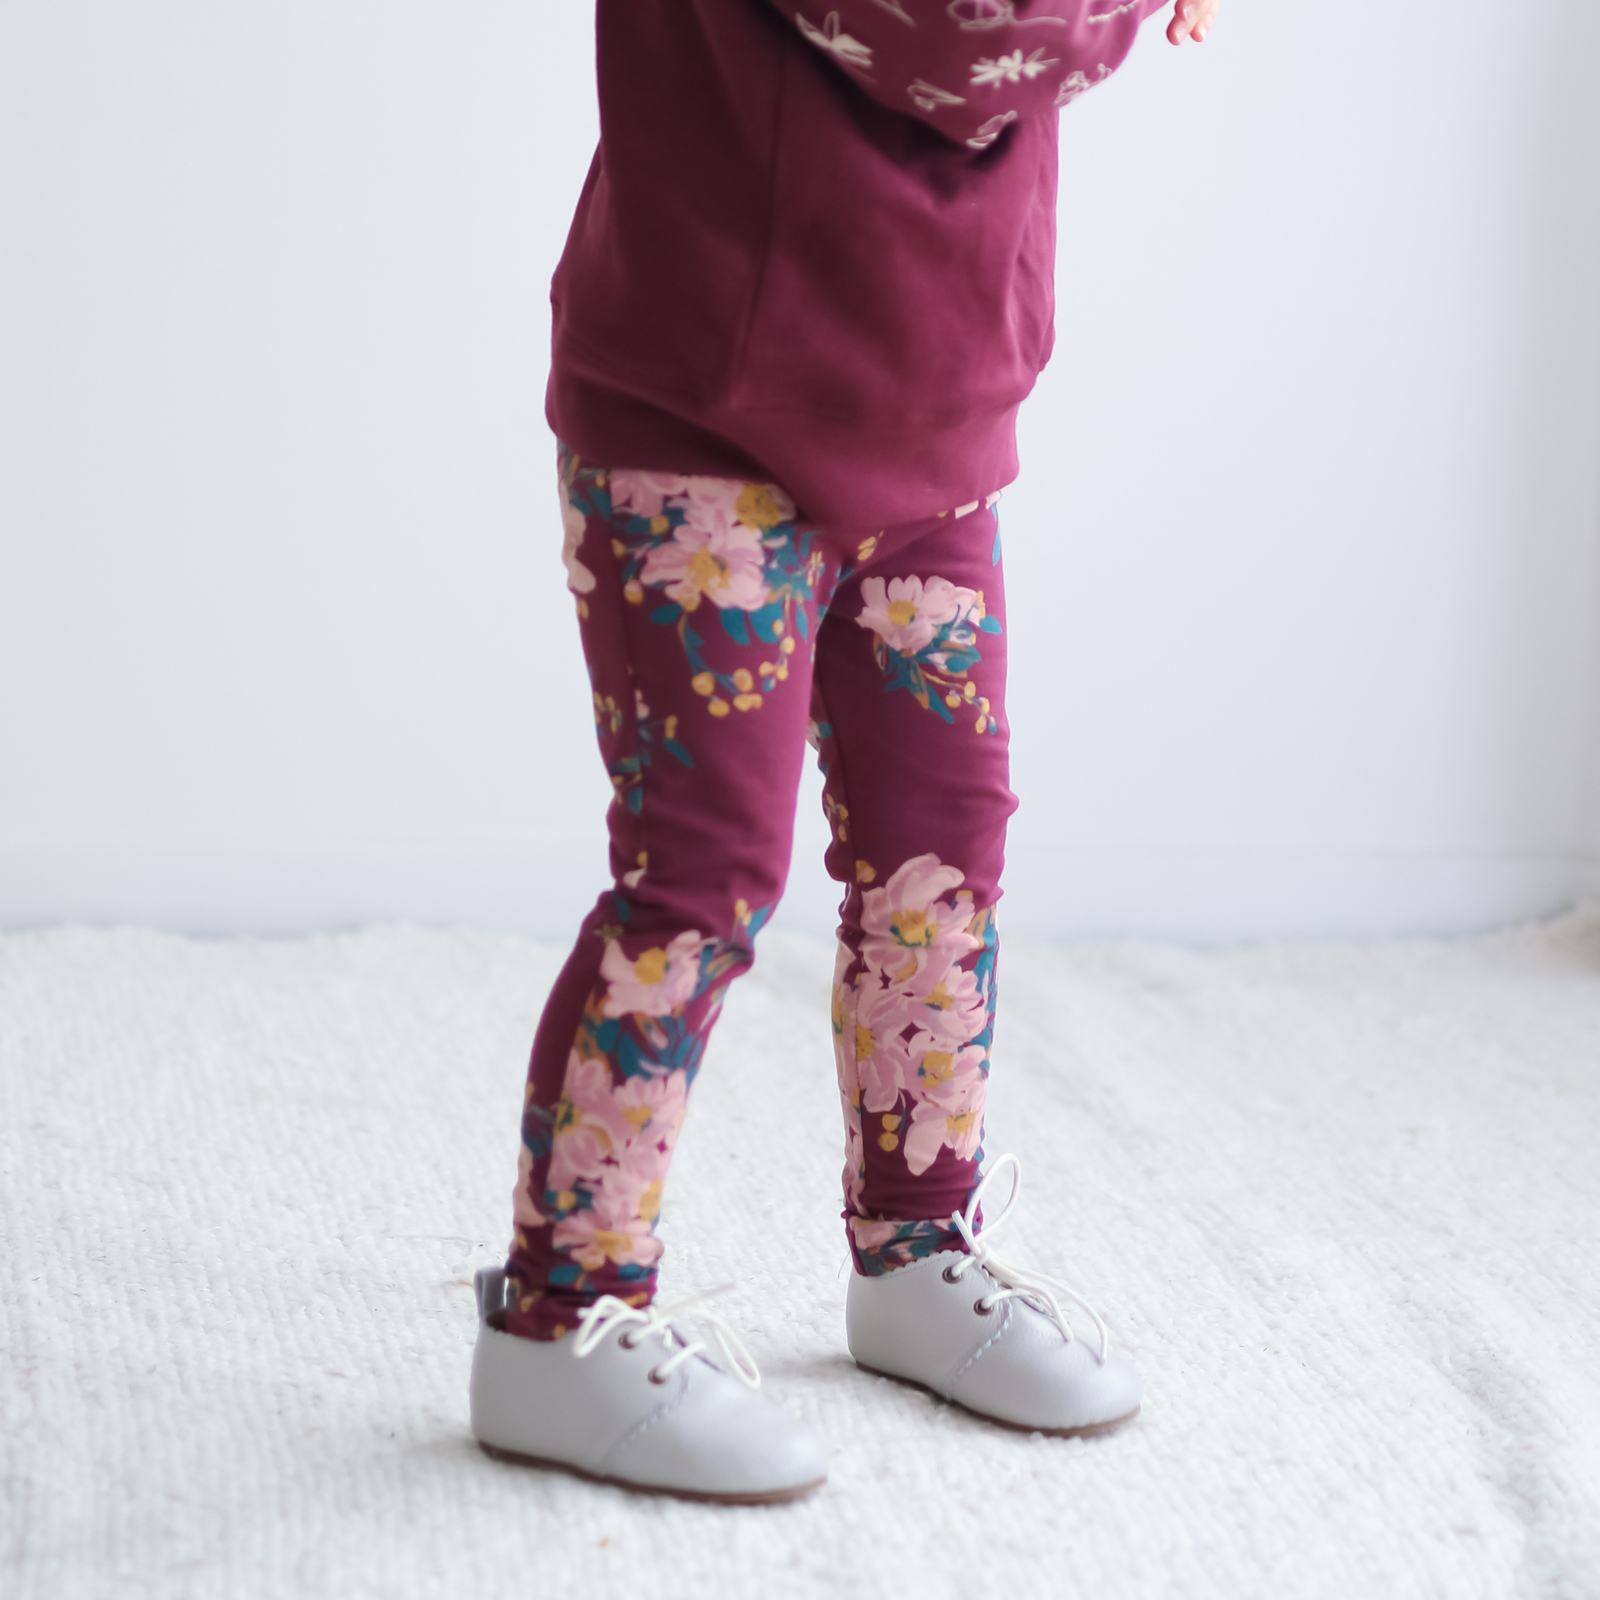 Colourful meadow floral tights, nature lover fashion, flower girl